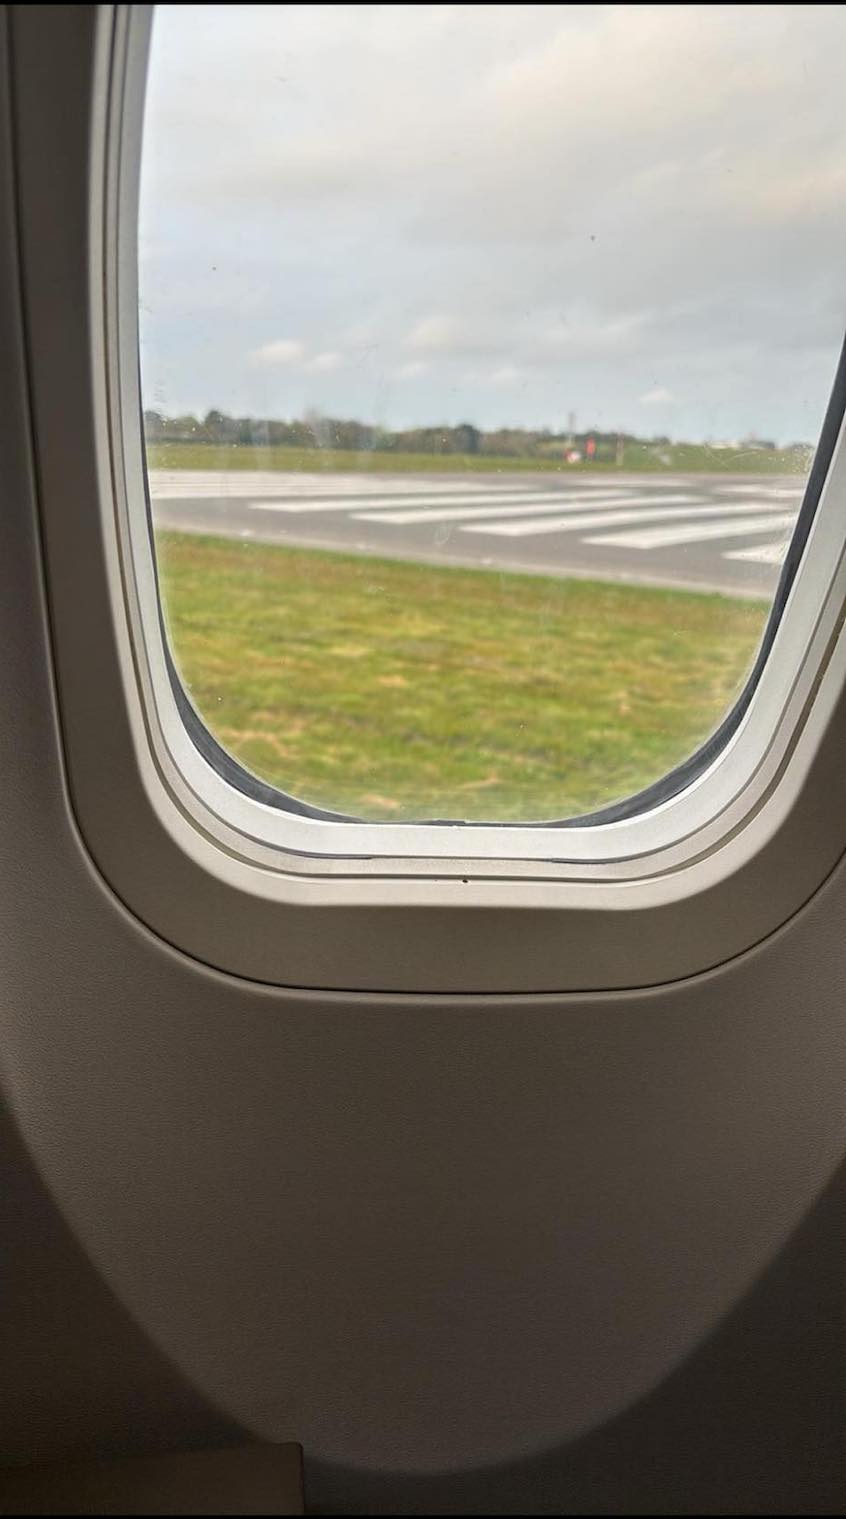 view_from_the_window_Dash_8_Luxwing_overshot_runway_leased_by_Aurigny__.jpg